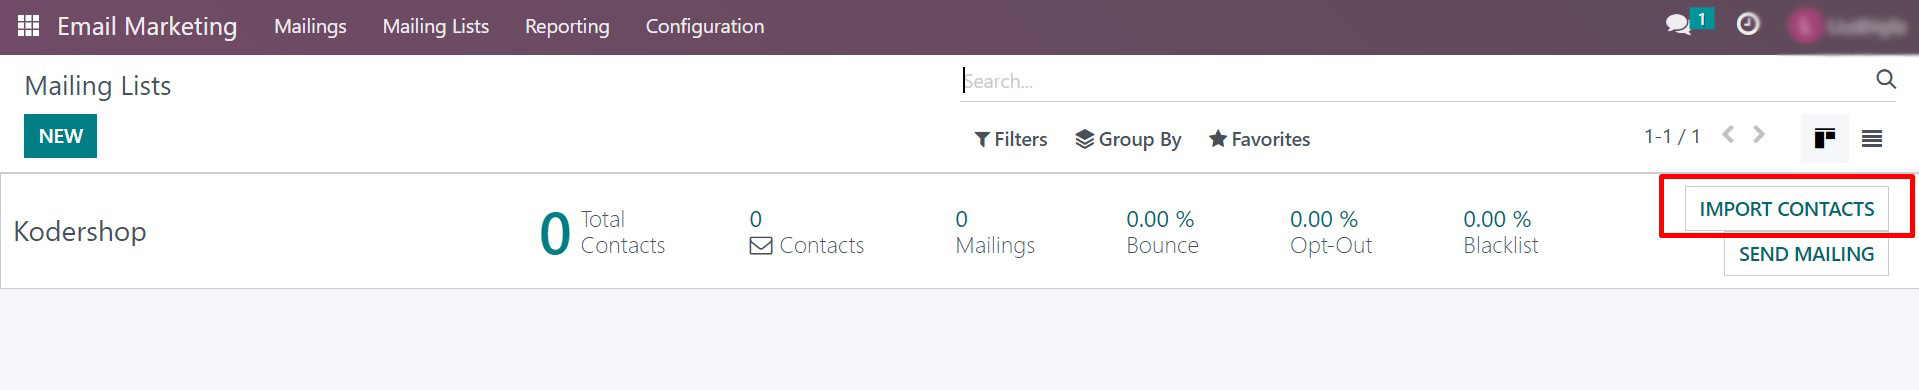 Importing Contacts to a Mailing List